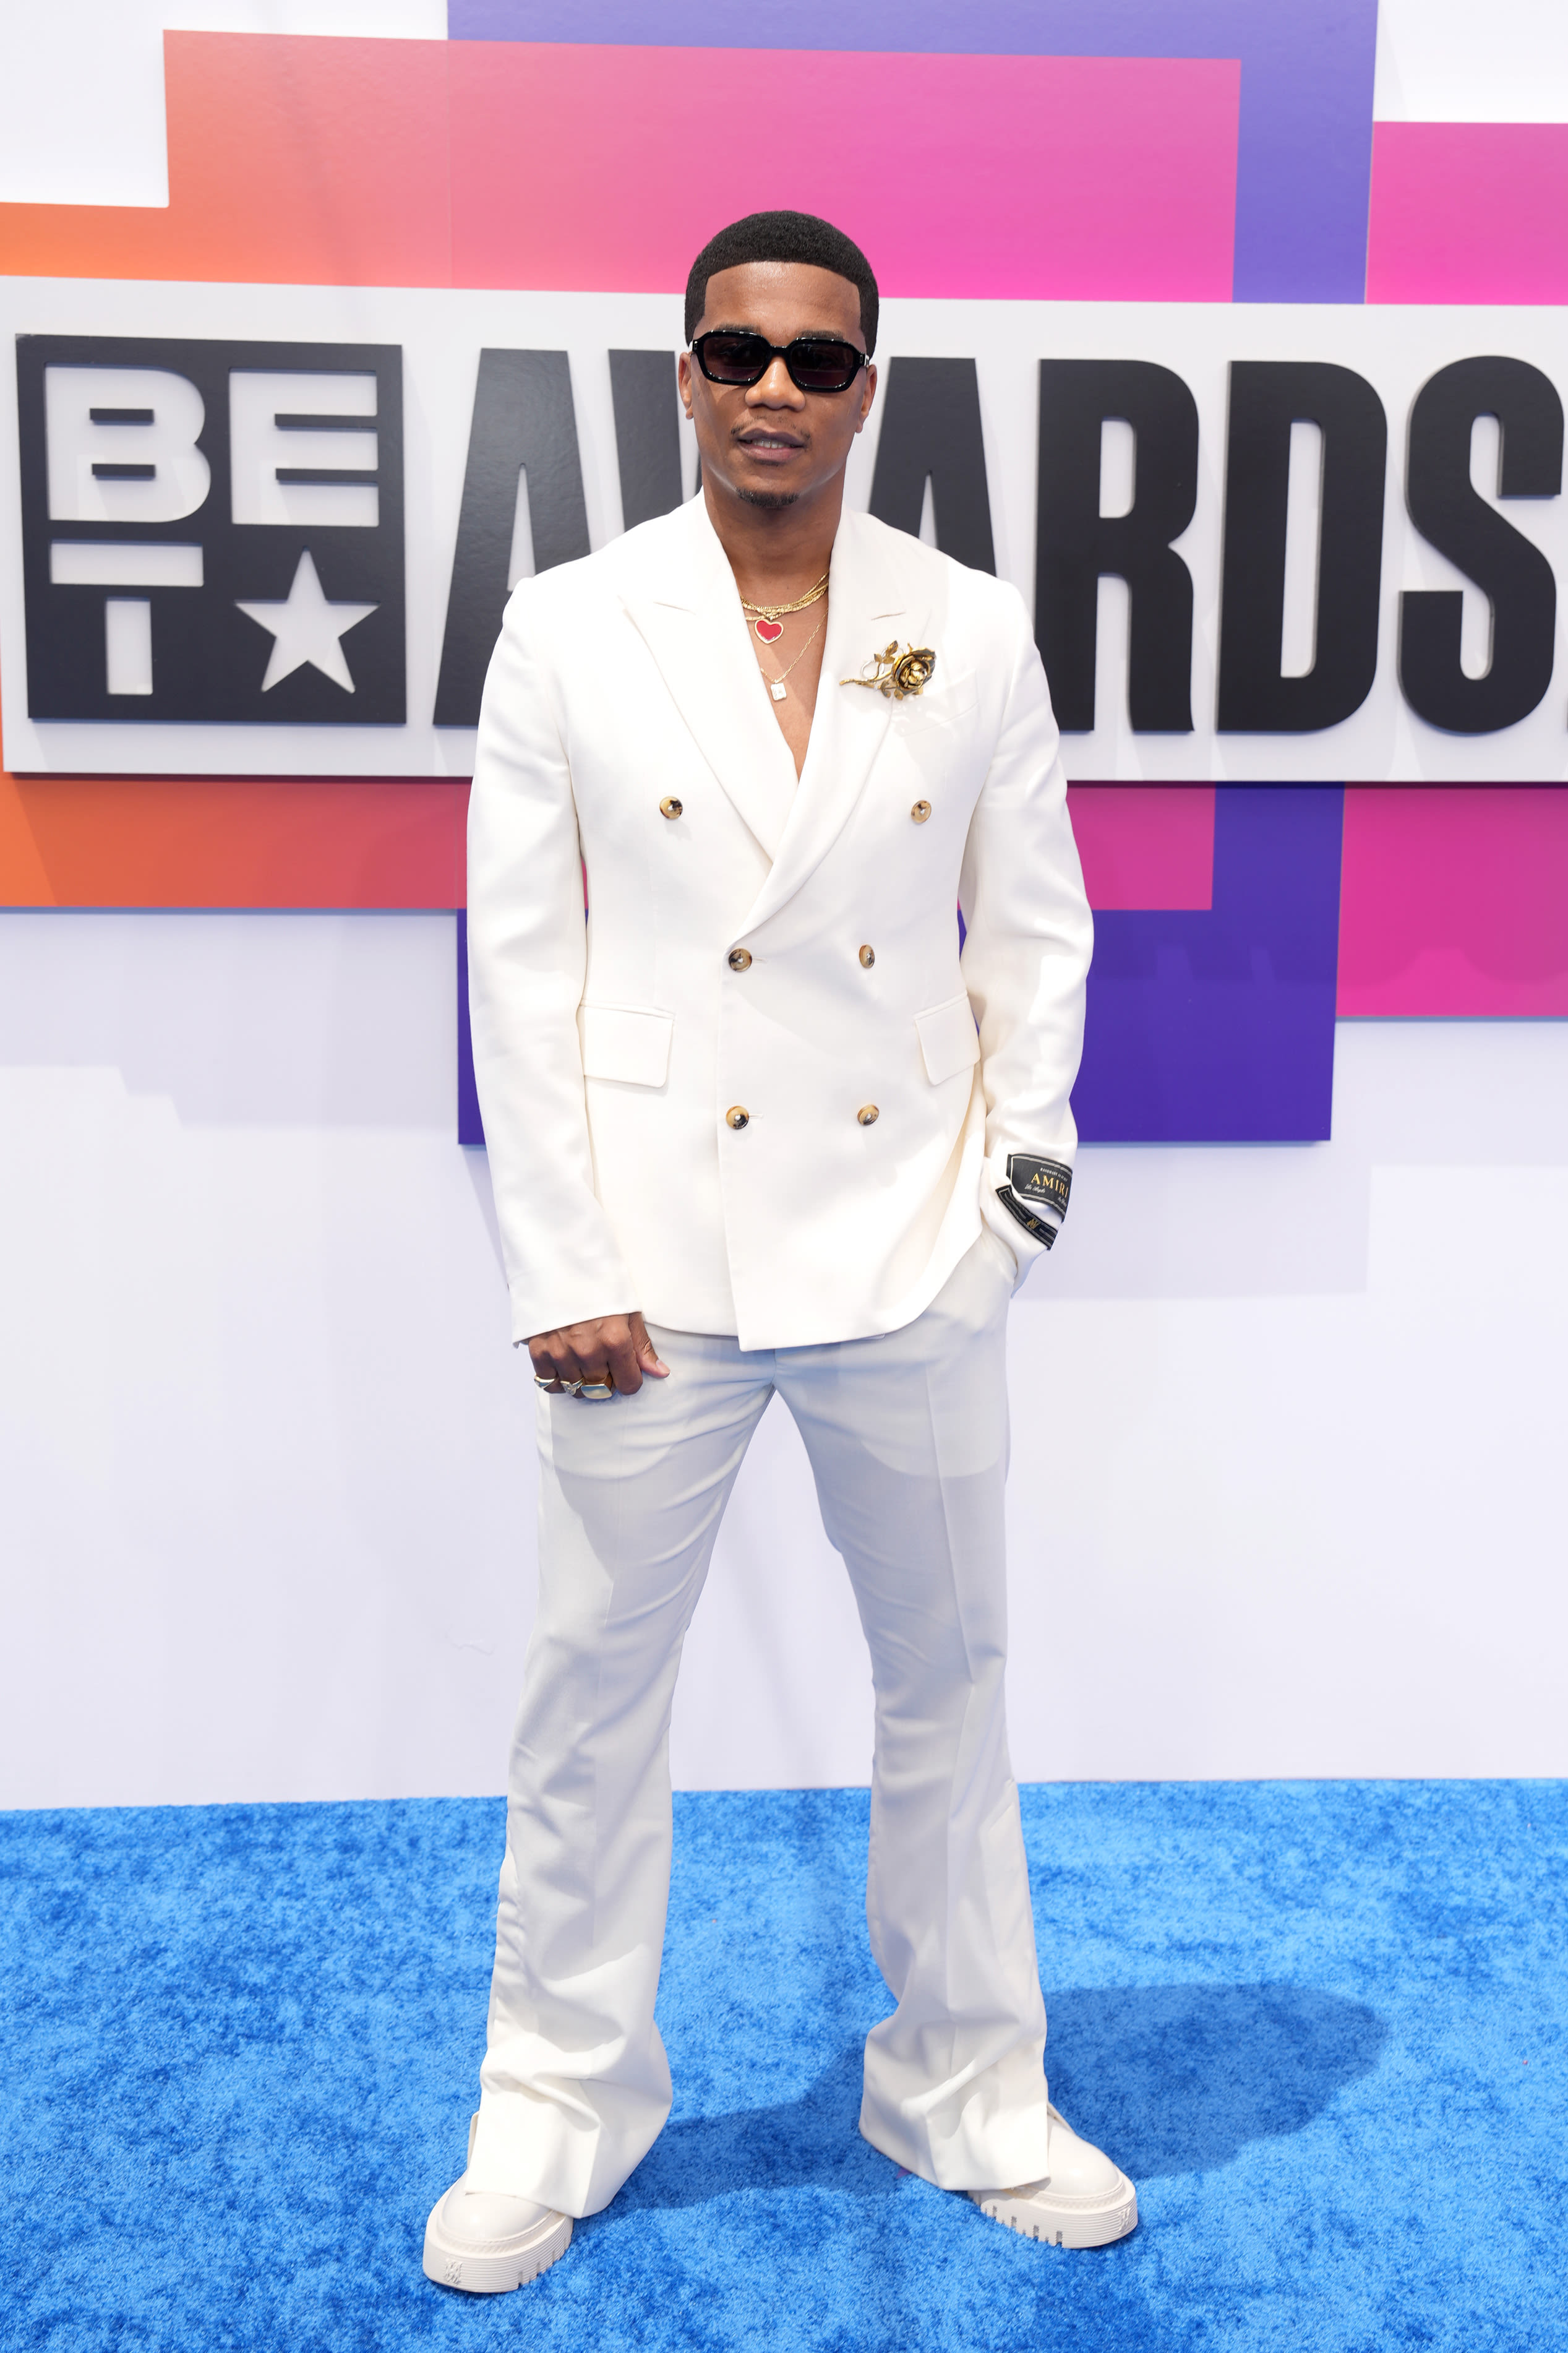 Cory Hardrict Says He and Ex-Wife Tia Mowry Are ‘All Love’ as They Attend BET Awards Separately